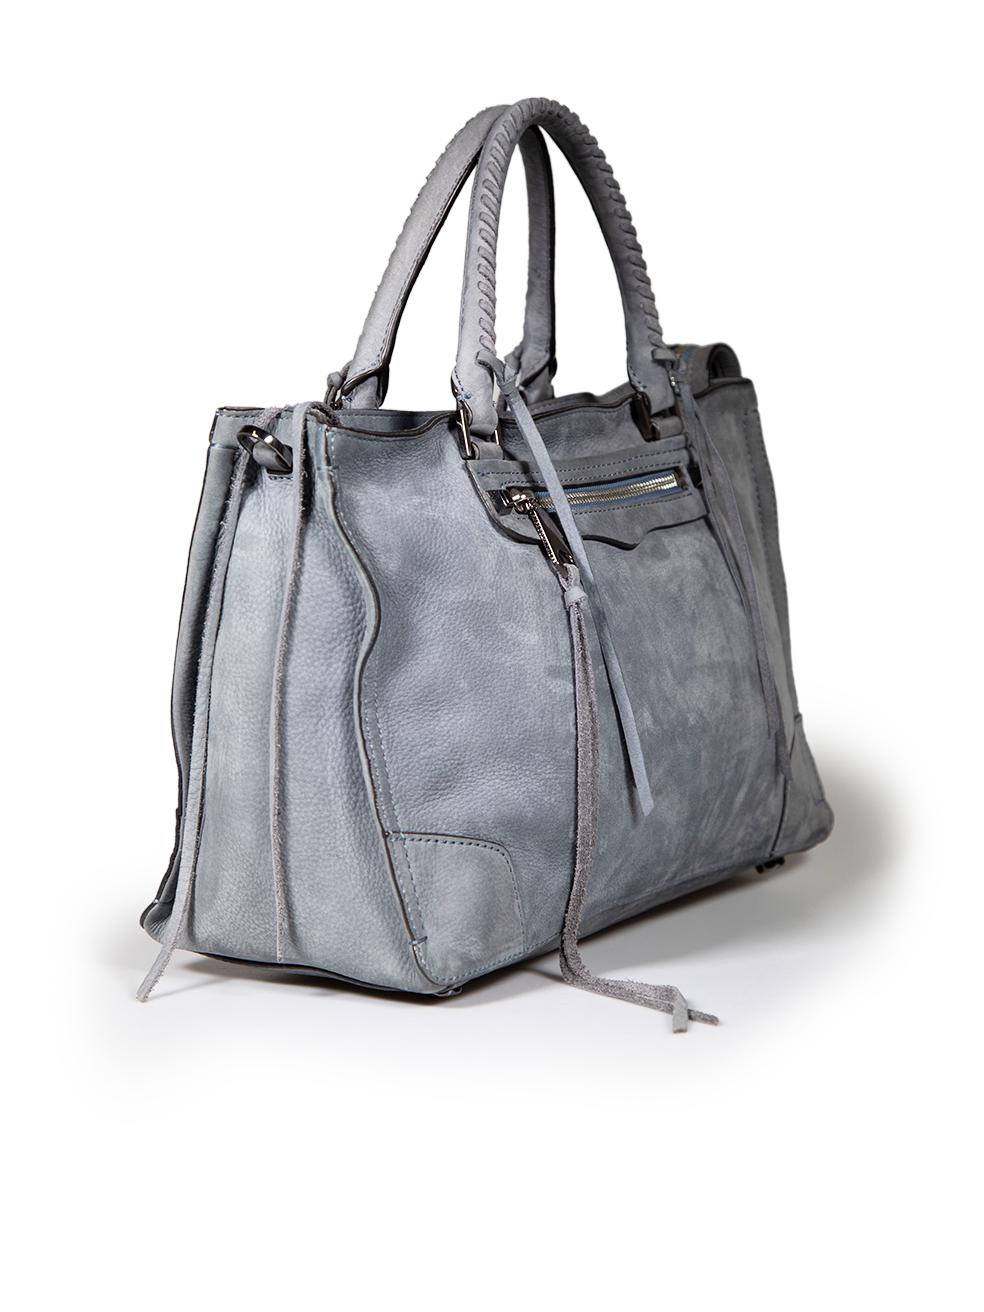 CONDITION is Very good. Minimal wear to bag is evident. Minimal wear to suede fringe with fraying and wear to the leather handles on this used Rebecca Minkoff designer resale item.
 
 
 
 Details
 
 
 Grey
 
 Suede
 
 Medium handbag
 
 2x Rolled top